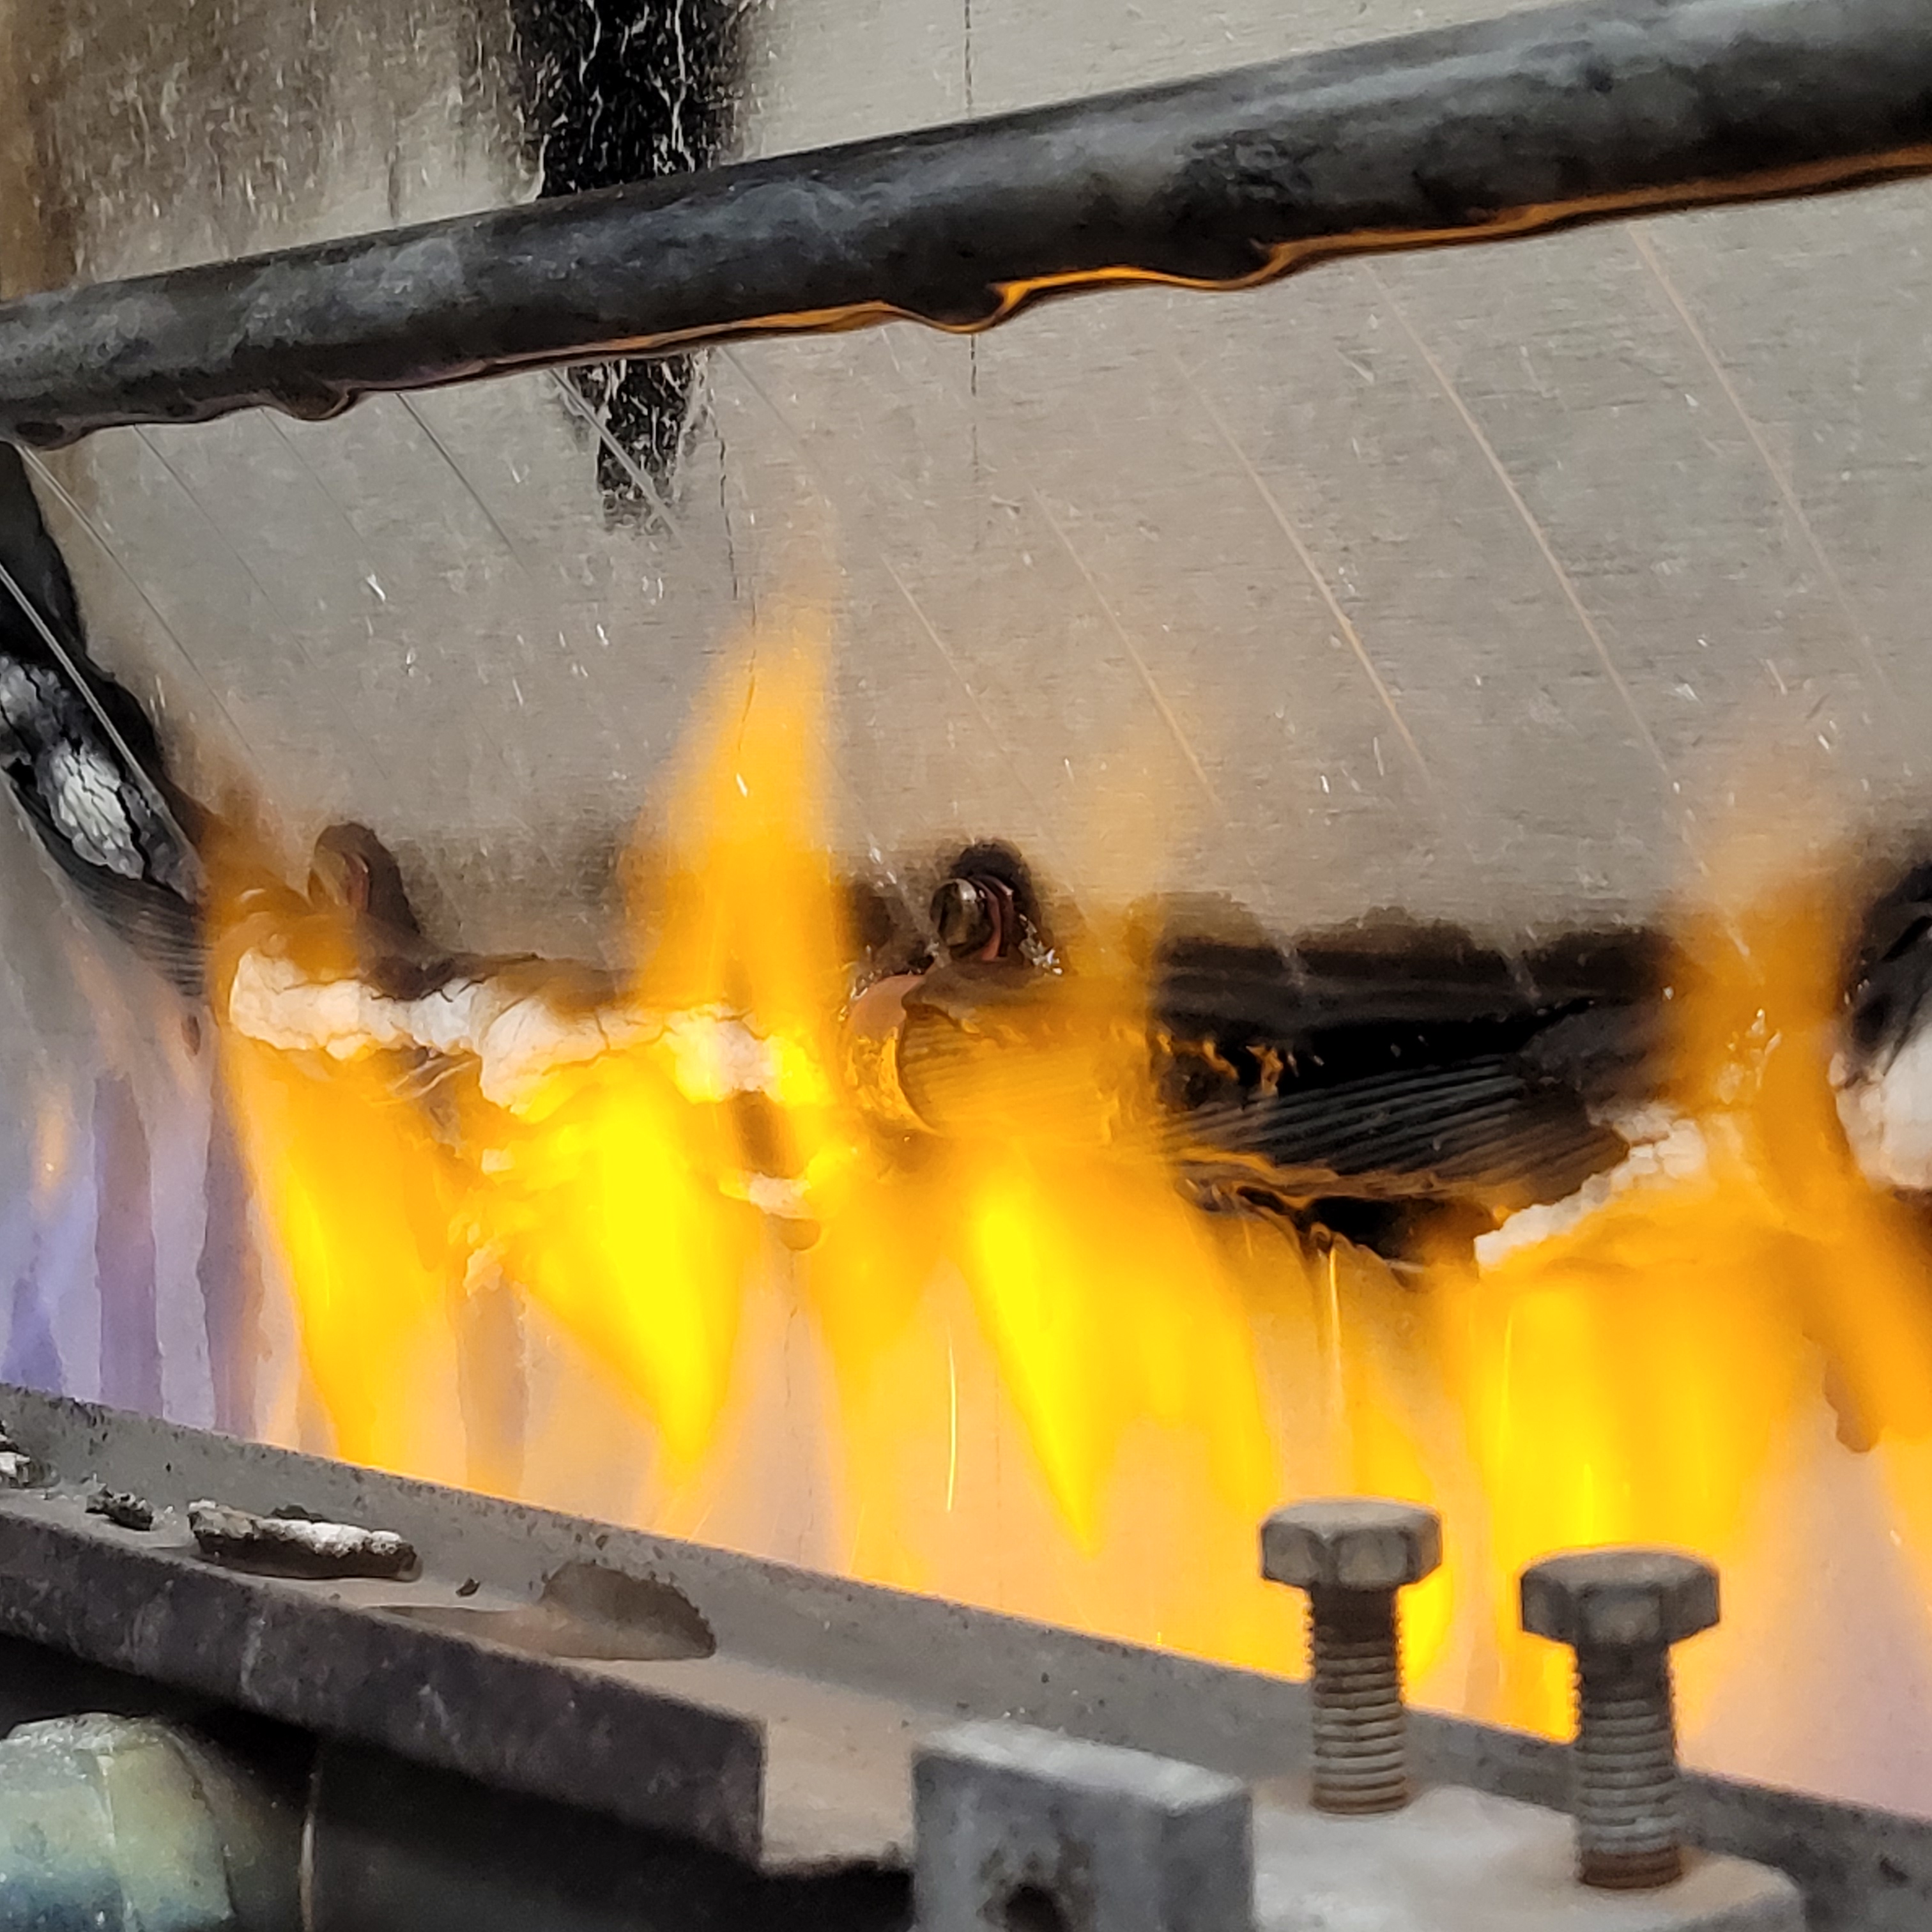 FP500 in a fire test